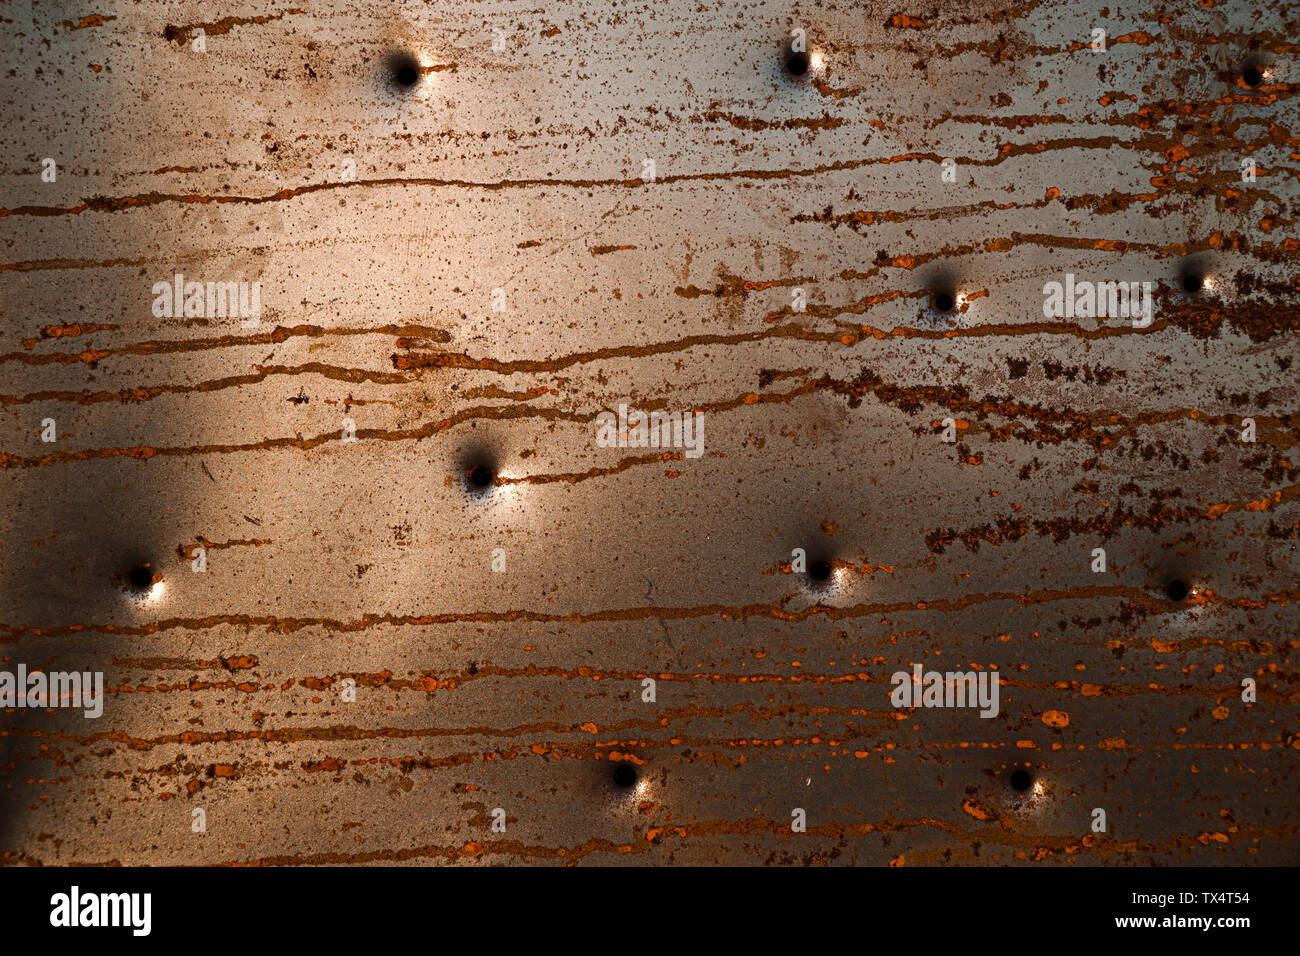 Rusty abstract metal background with looks like bullet holes Stock Photo